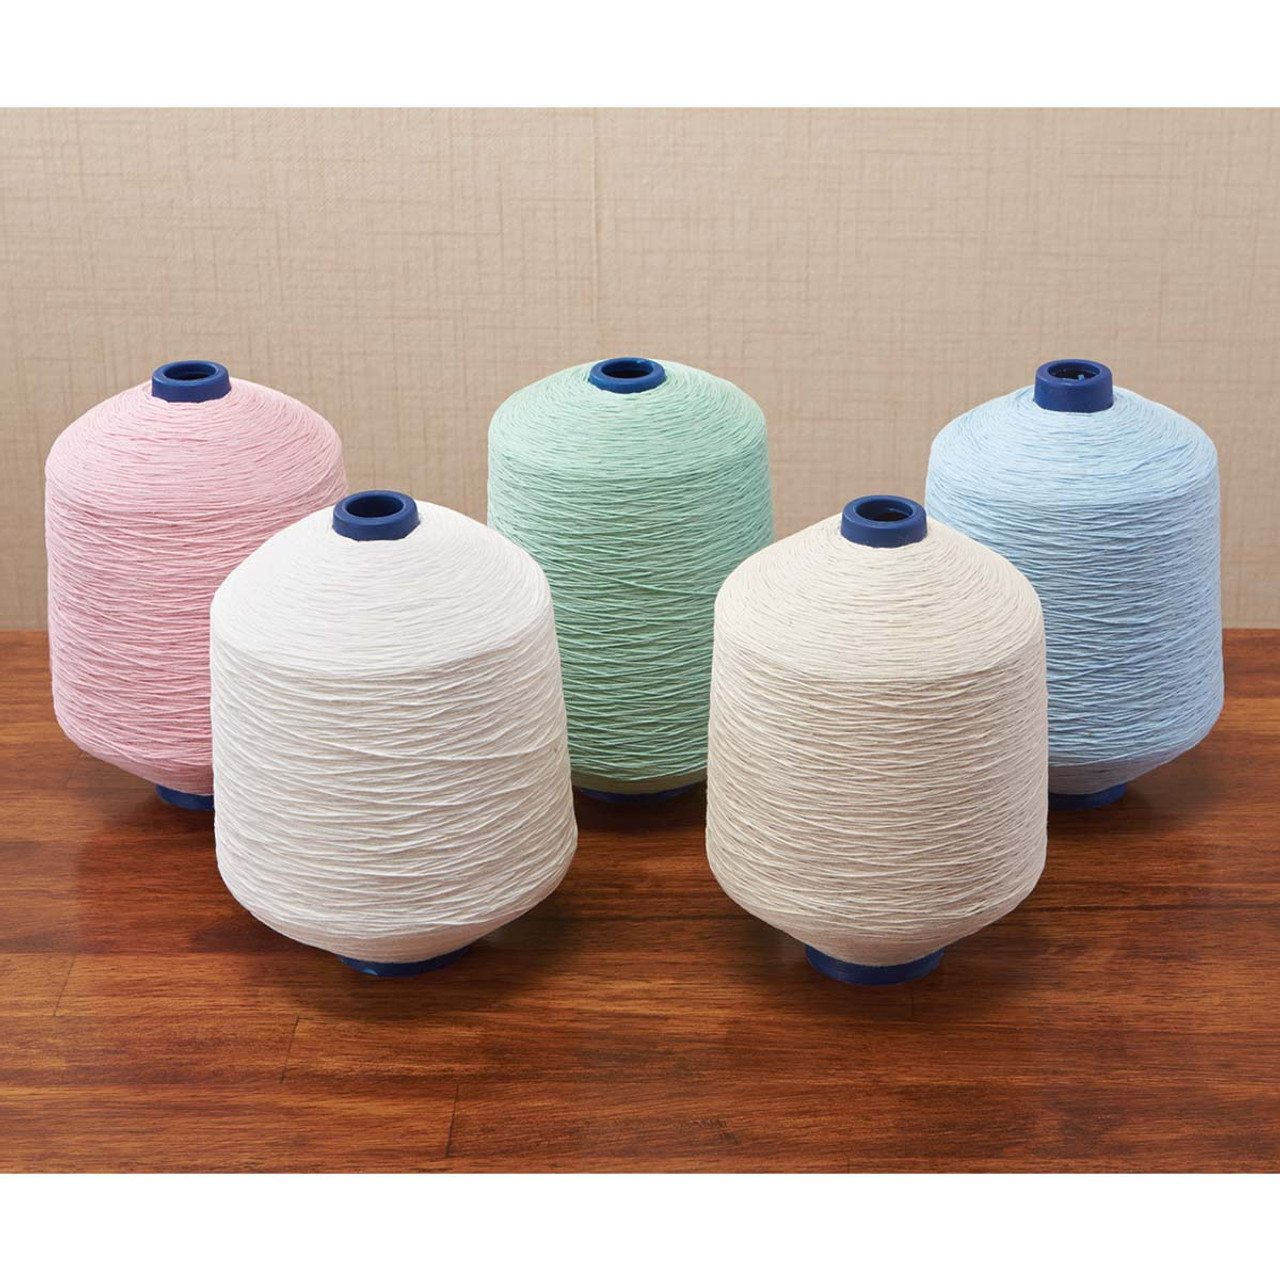 Crochet Thread Bundles Variety of Colors & Brands Size 10 Machine Washable  100% Cotton Crochet Projects Crafting and Art Needs 